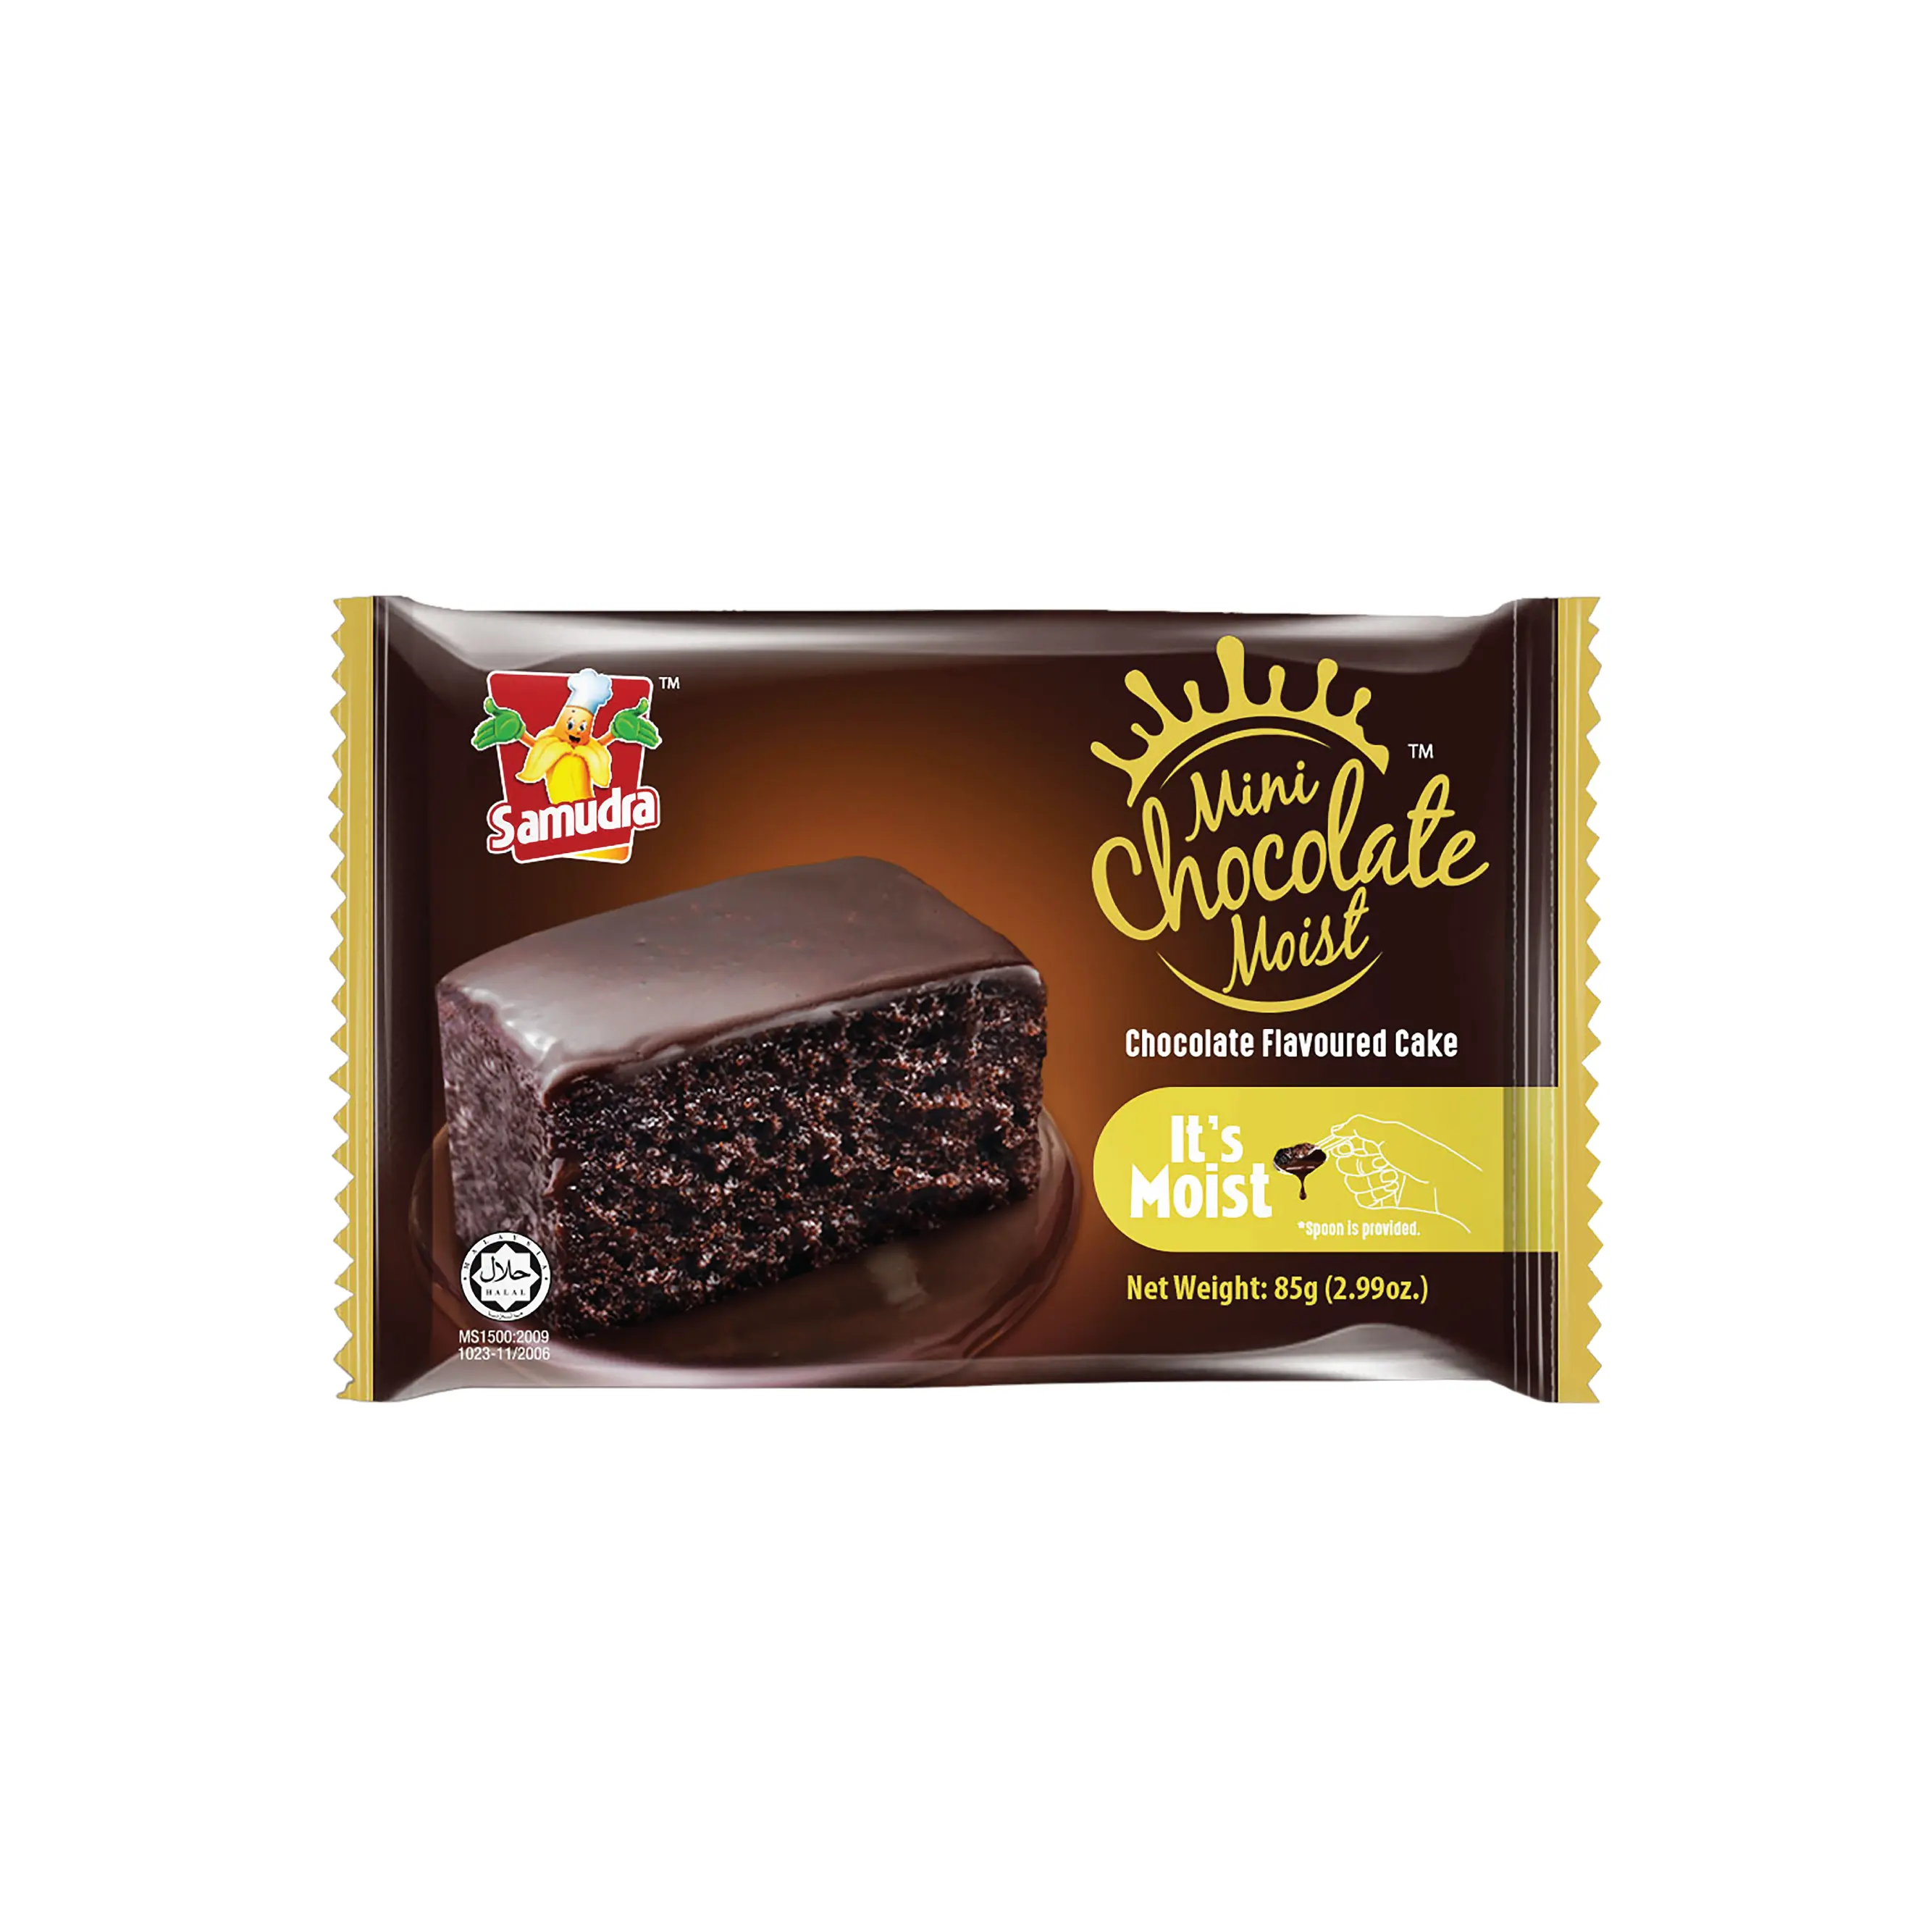 Baked Goods Delicious Halal Samudra Mini Chocolate Moist Cake 85g x 18 pkts come with strong chocolate taste